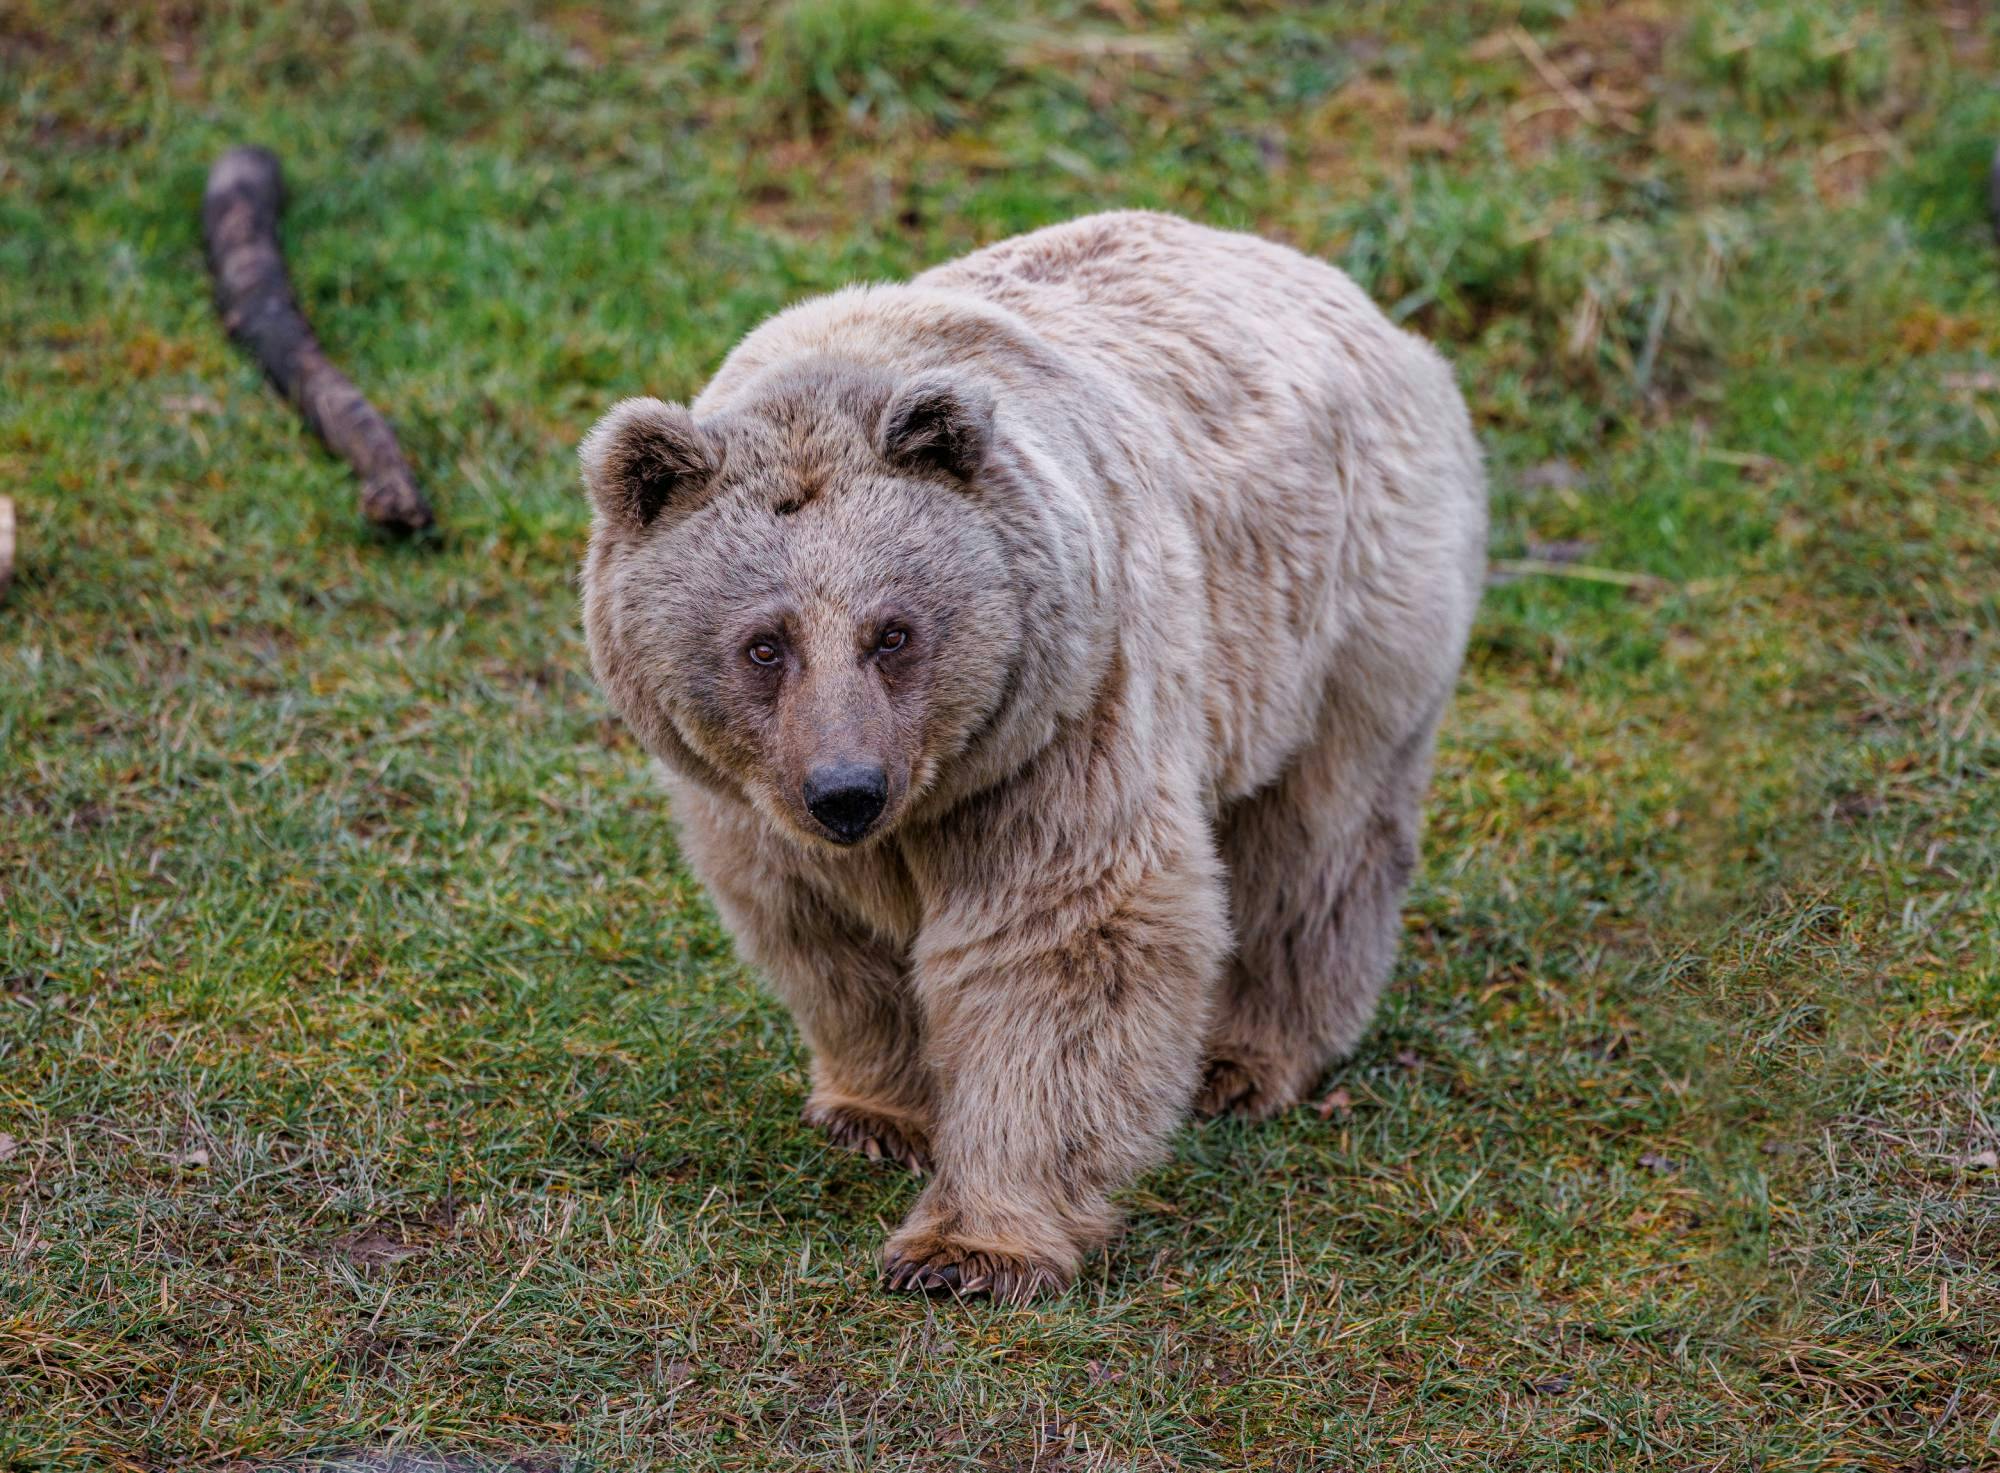 Syrian brown bears: Unveiling a hidden side of the Middle East